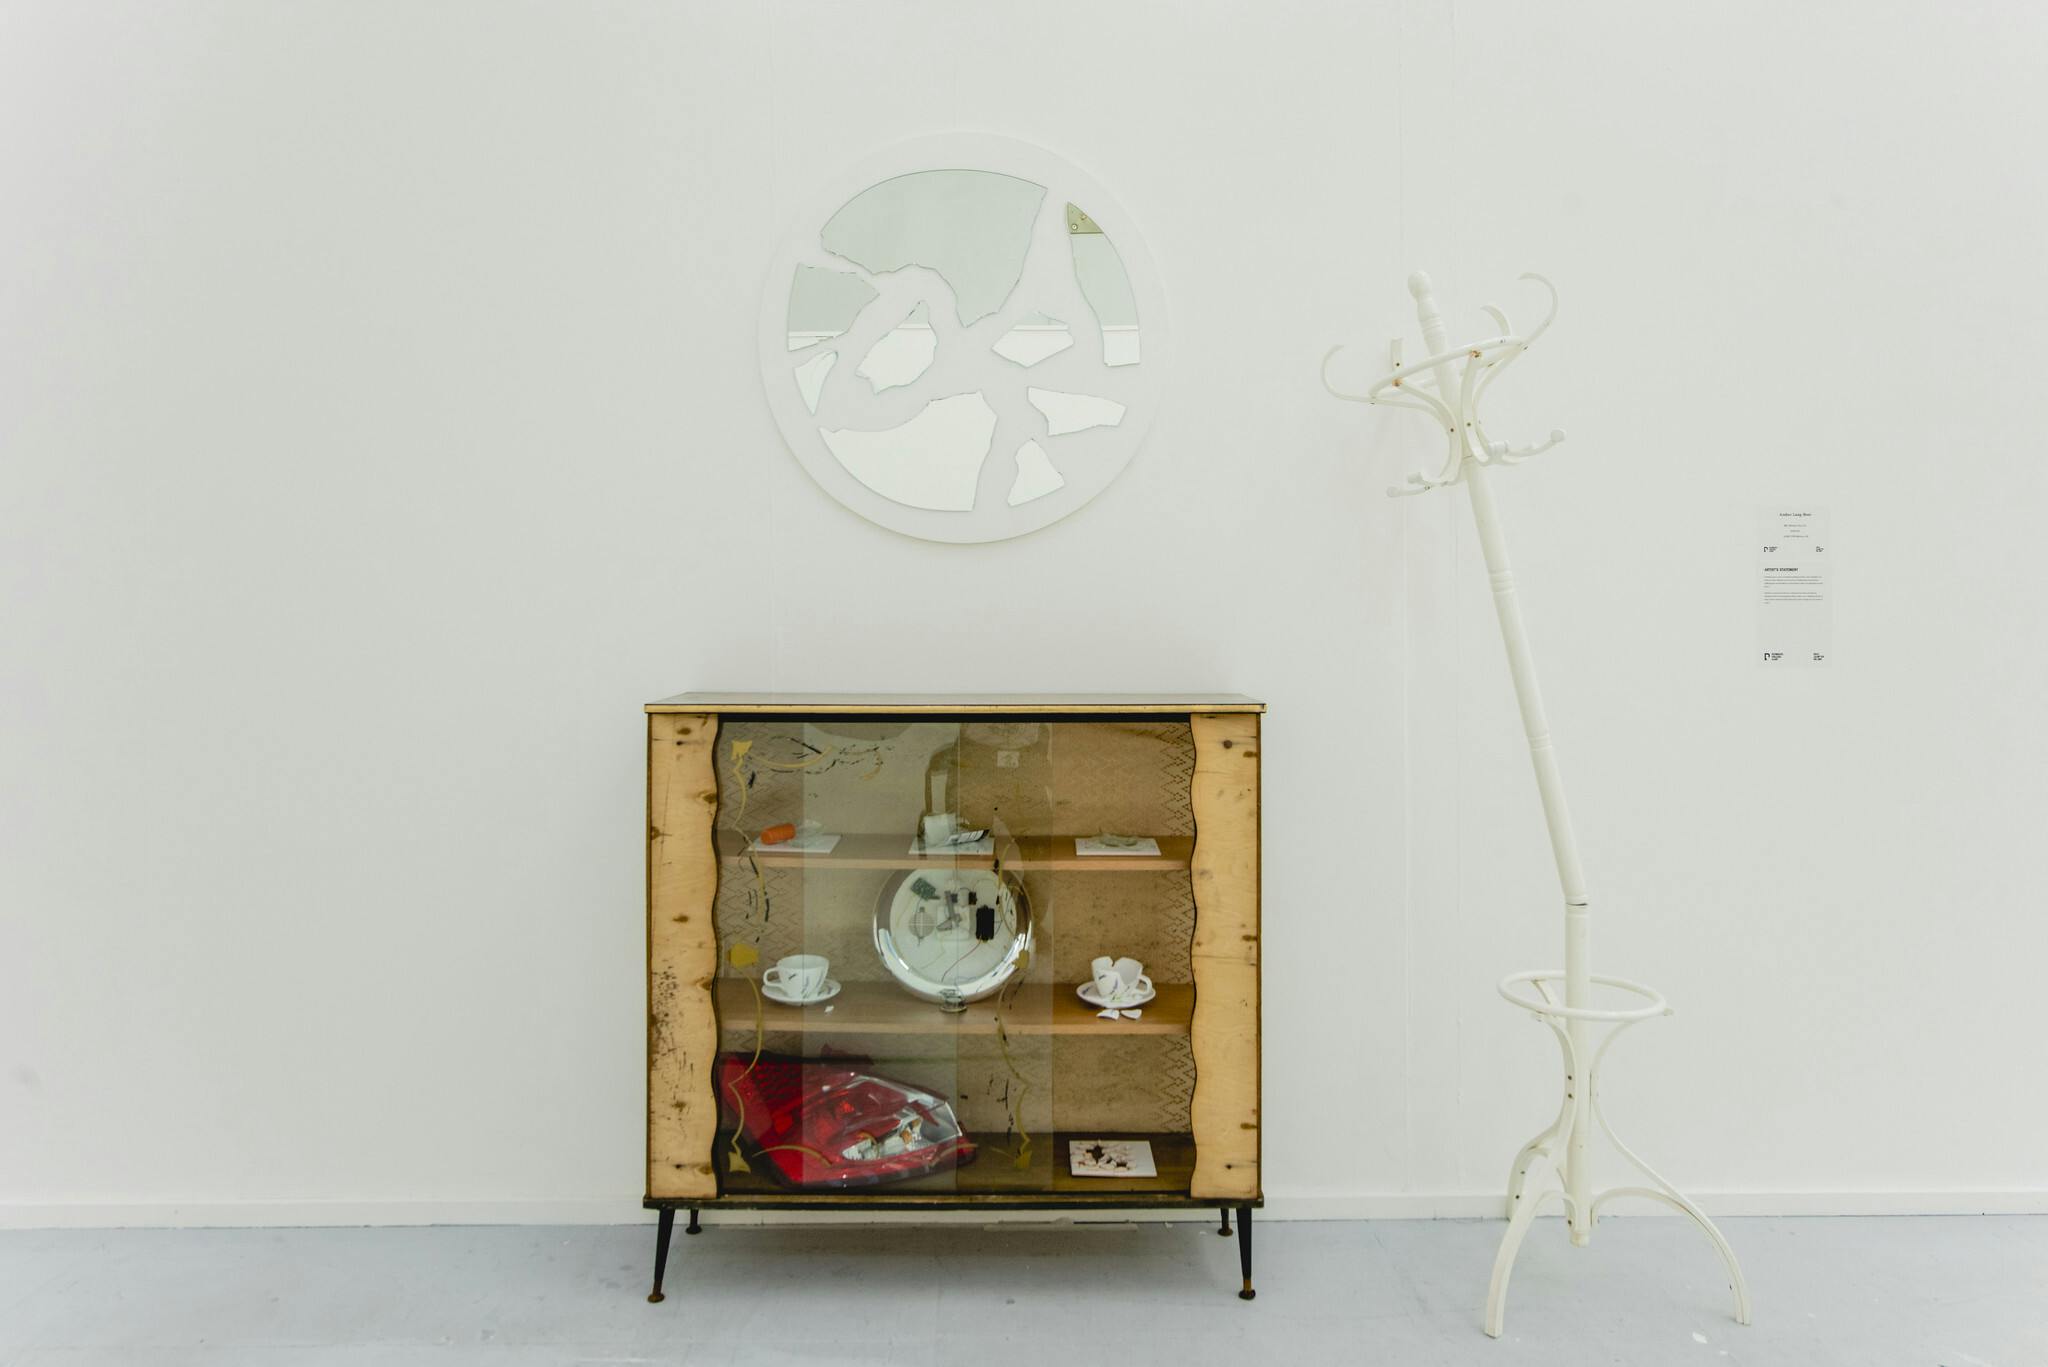 Plymouth College of Art Fine Art installation by Amber Lang-Beer featuring a dining room cabinet and broken home ware